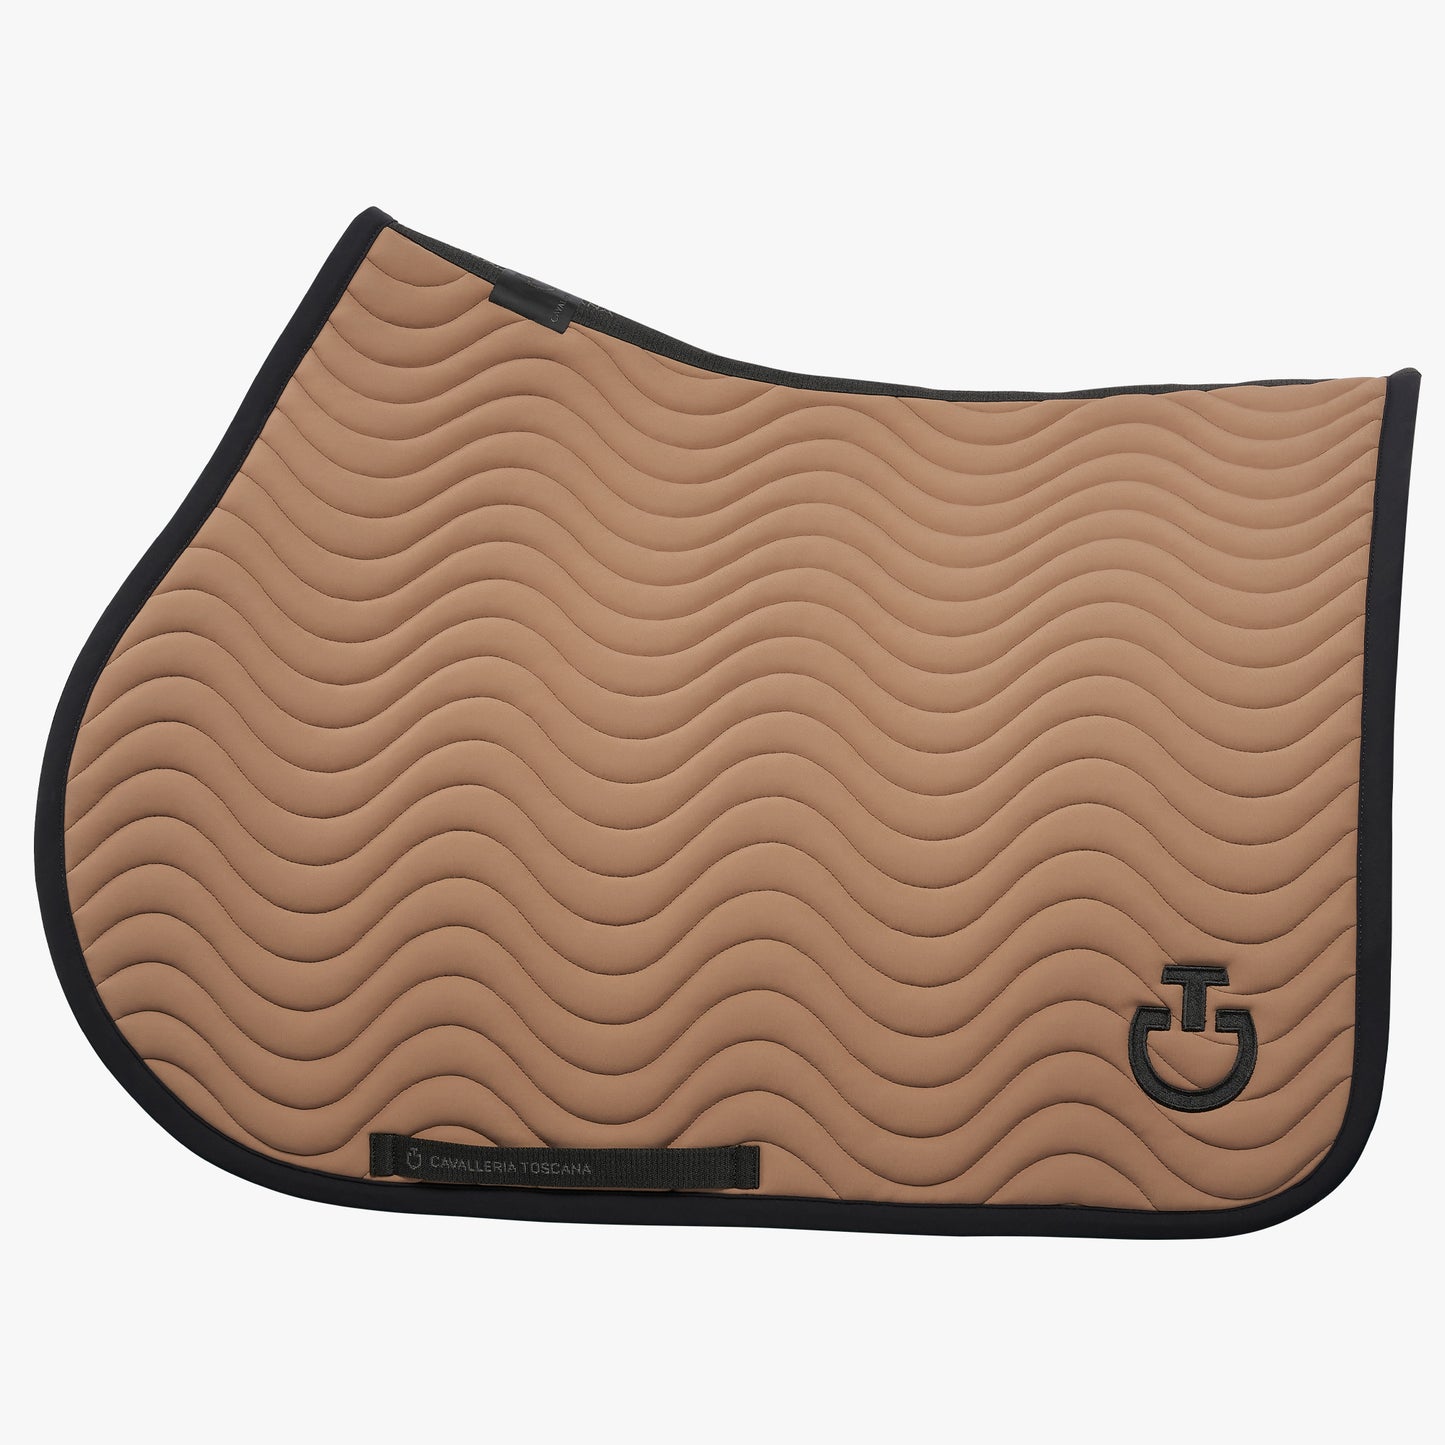 Tapis de selle Quilted Wave Jersey Beige